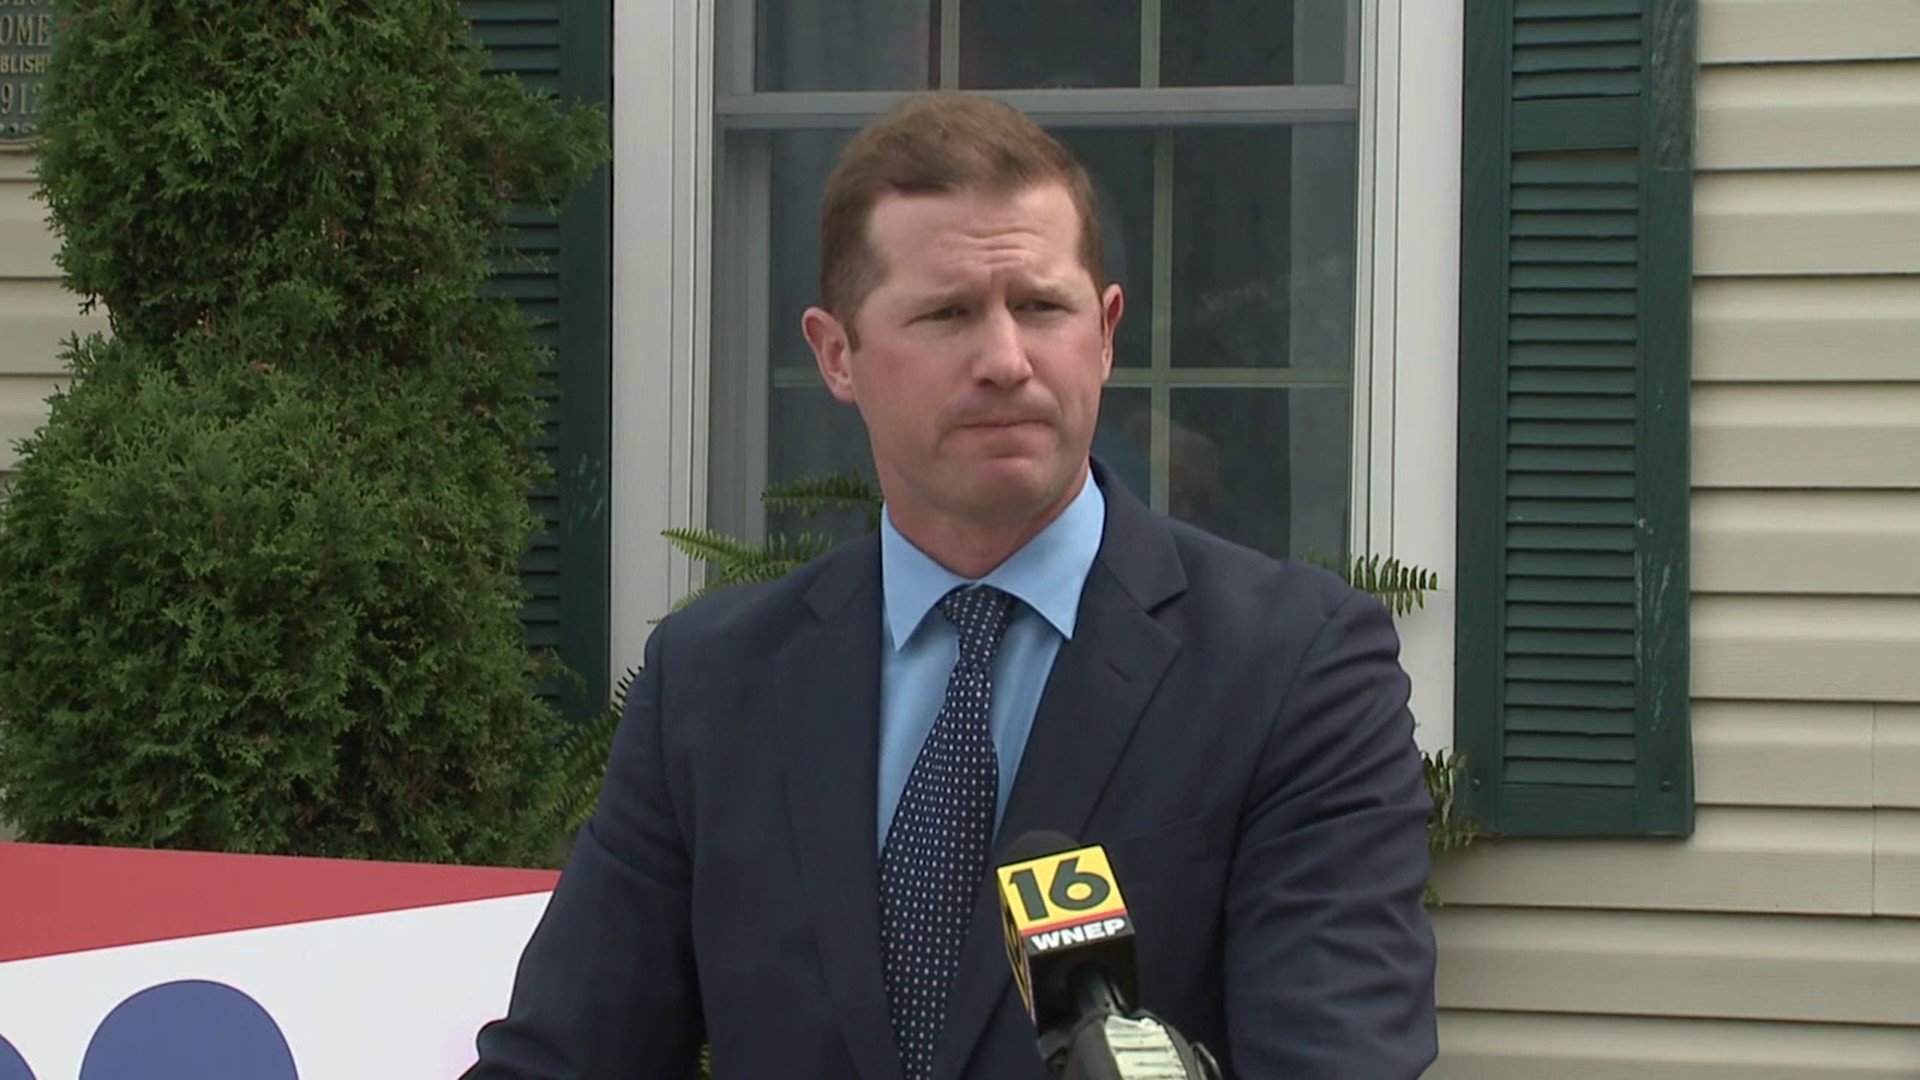 Former Penn State quarterback and retired NFL player Matt McGloin announced he is running for Lackawanna County Commissioner.